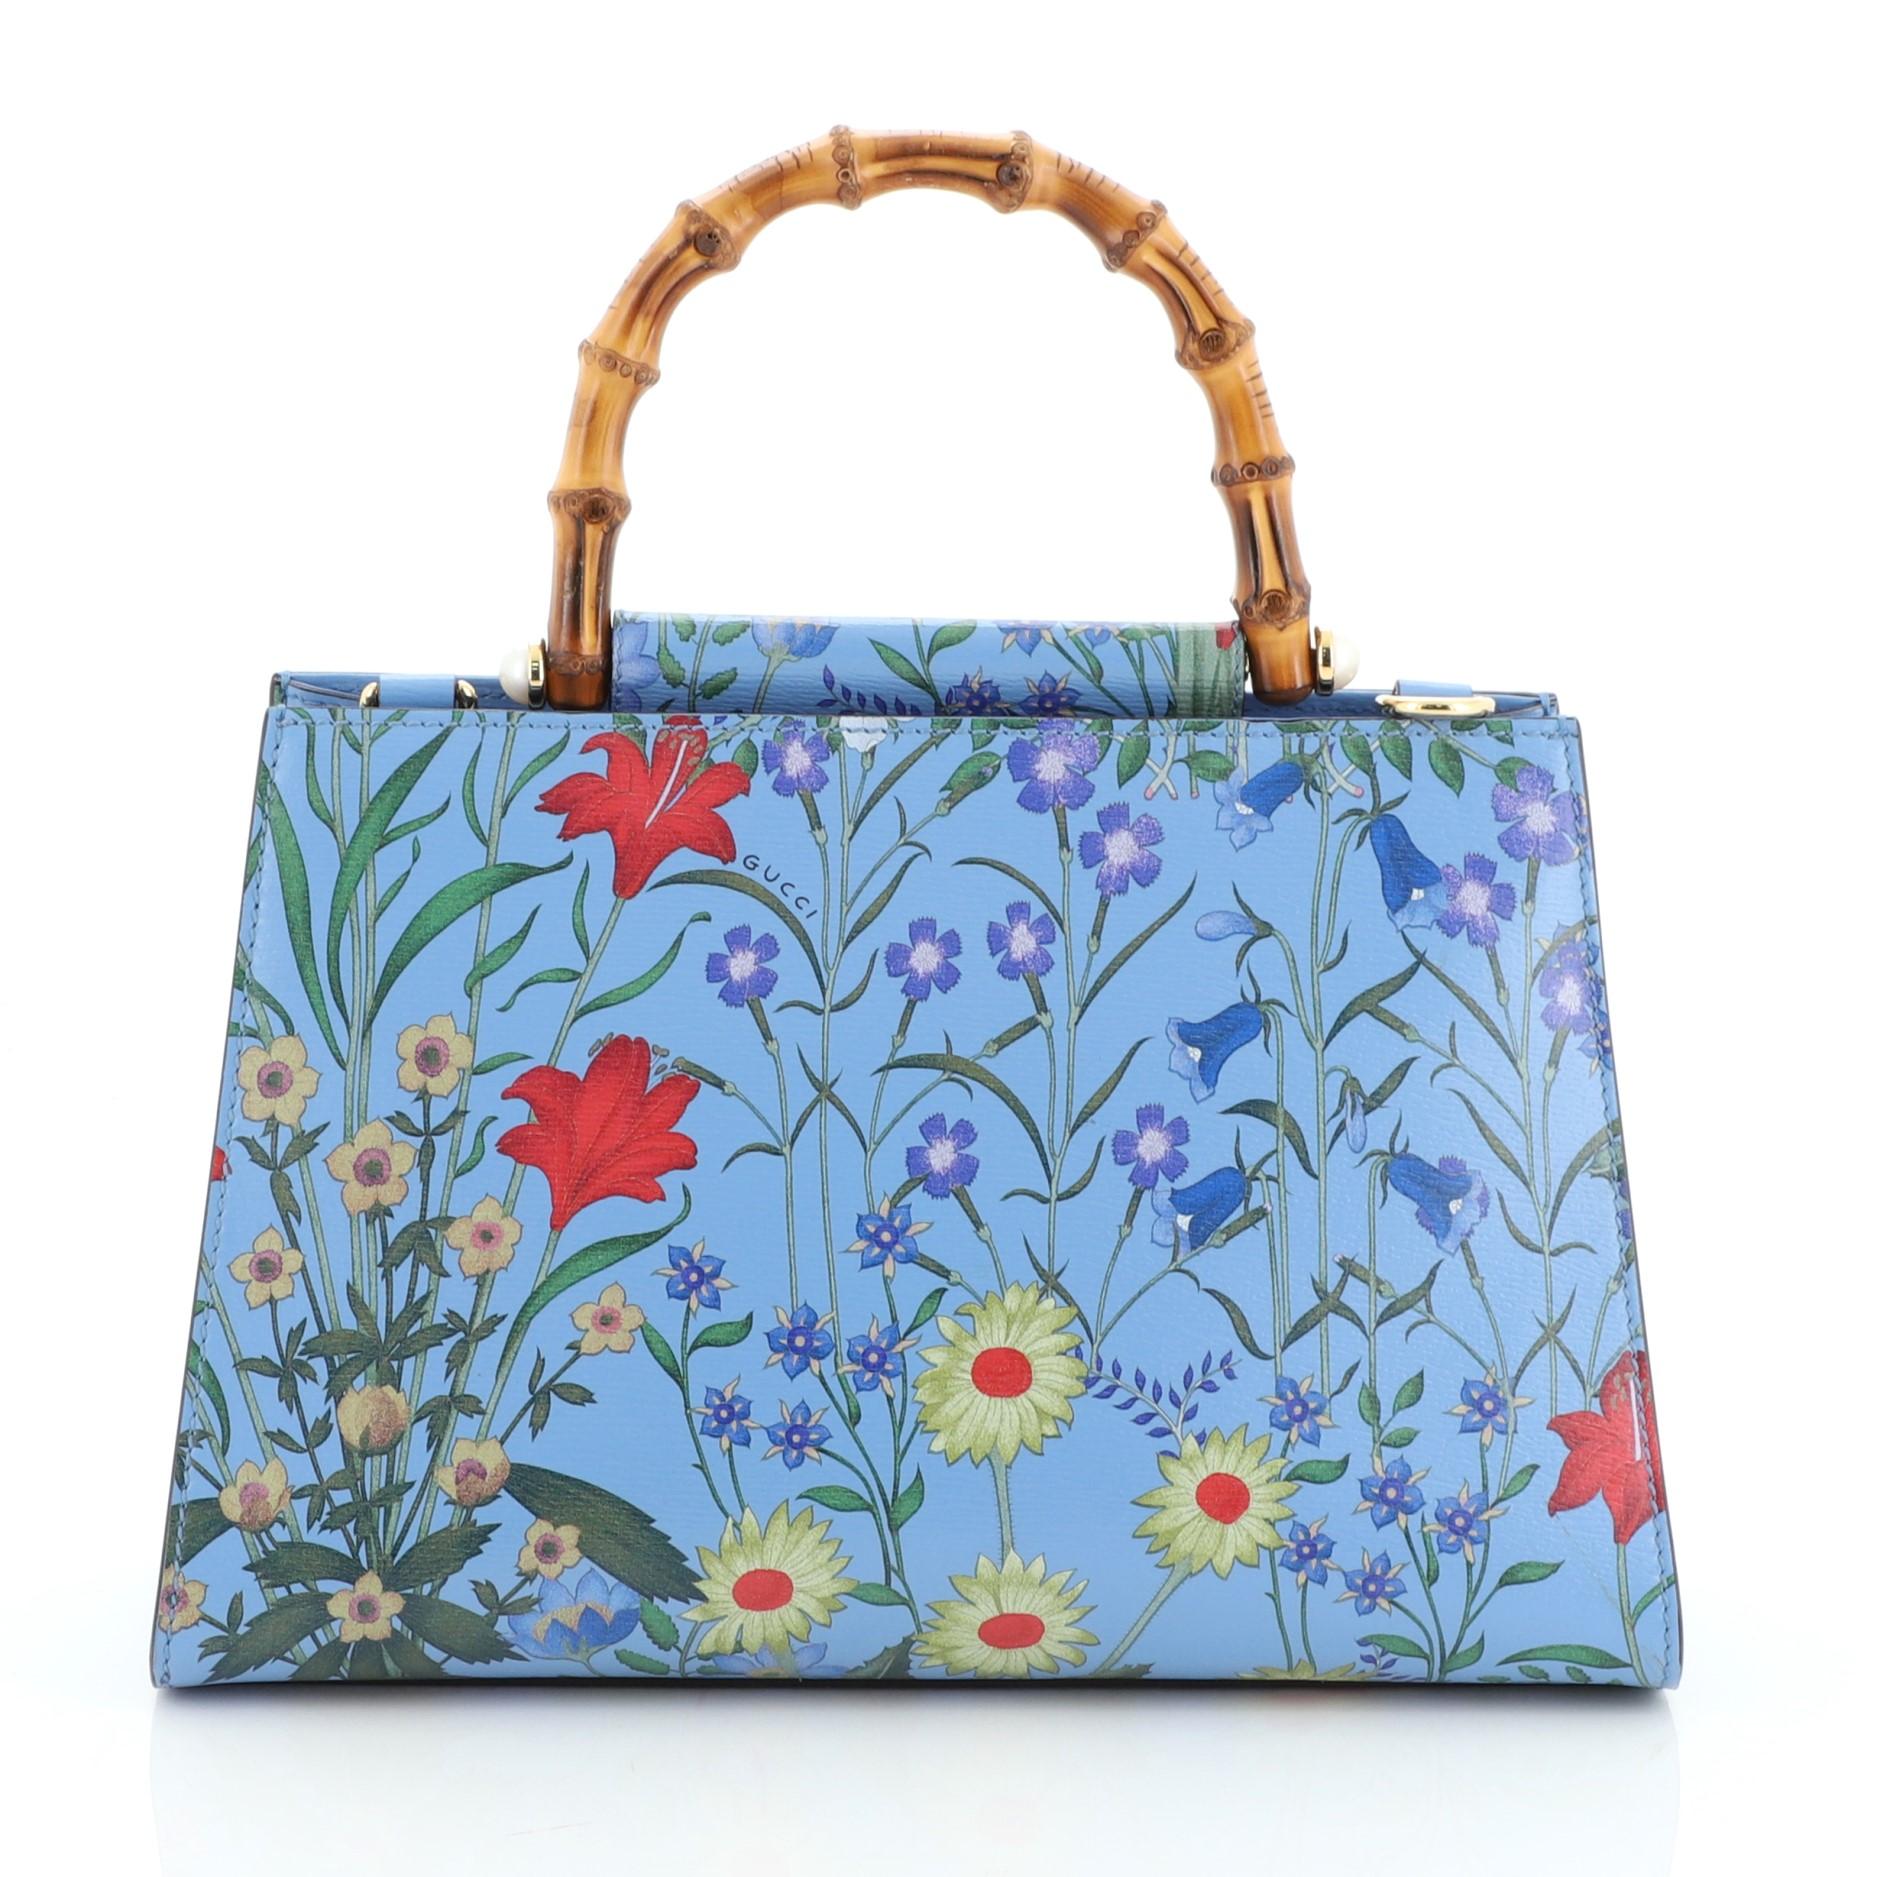 Blue Gucci Nymphaea Top Handle Bag Floral Printed Leather Small